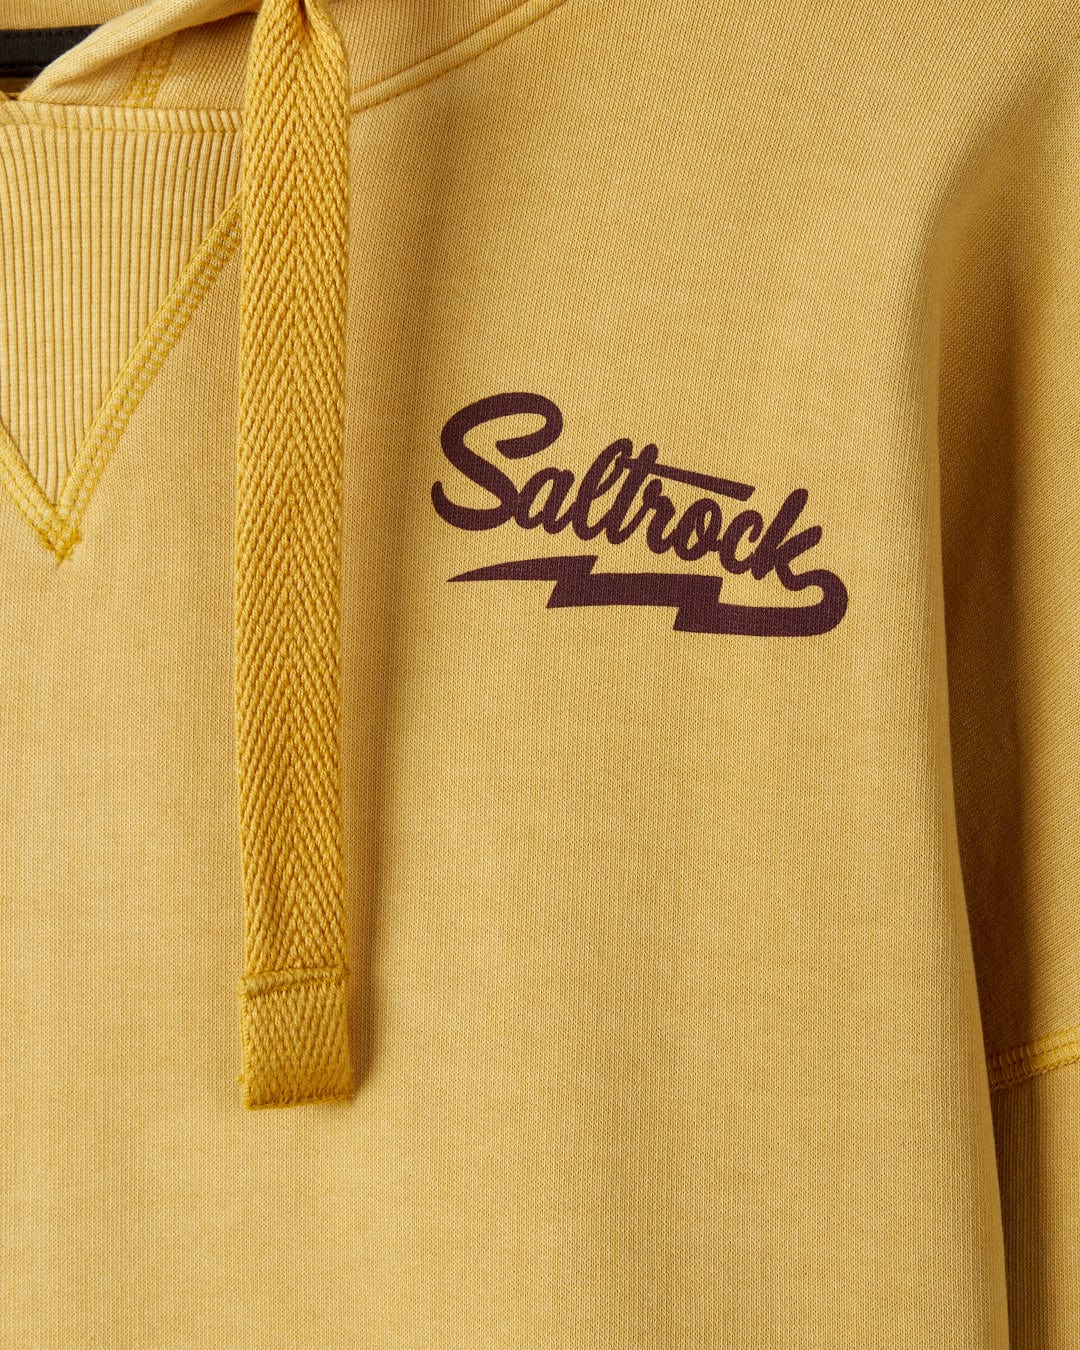 Close-up of a mustard yellow Saltrock Gas Station hoodie with a purple "Saltrock" logo, detailed texture on the drawstring, and fabric. This kangaroo pocket hoodie is crafted from recycled polyester.